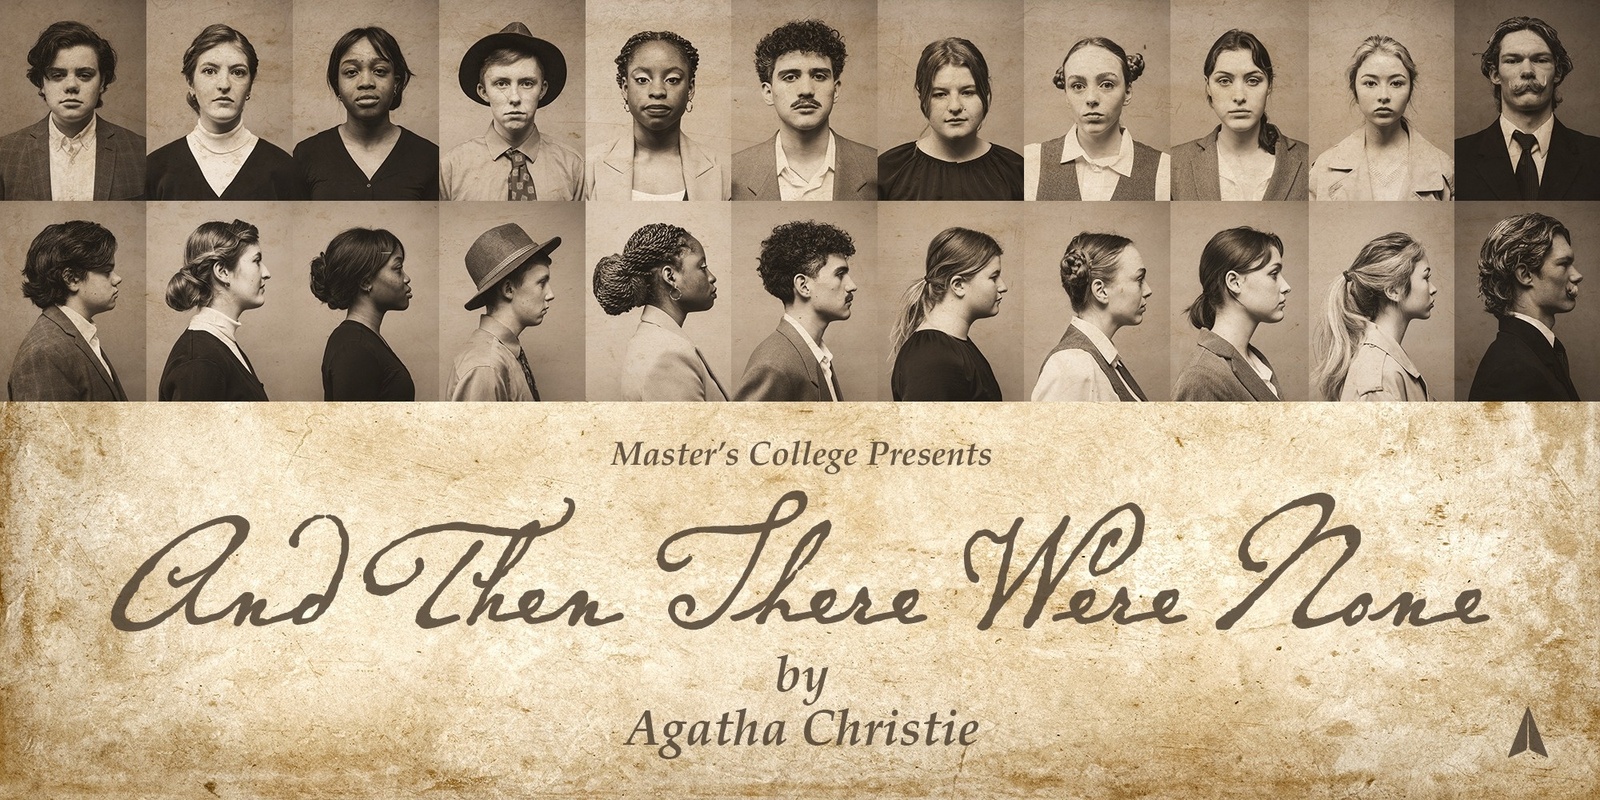 Banner image for Master's College Presents: "And Then There Were None" by Agatha Christie